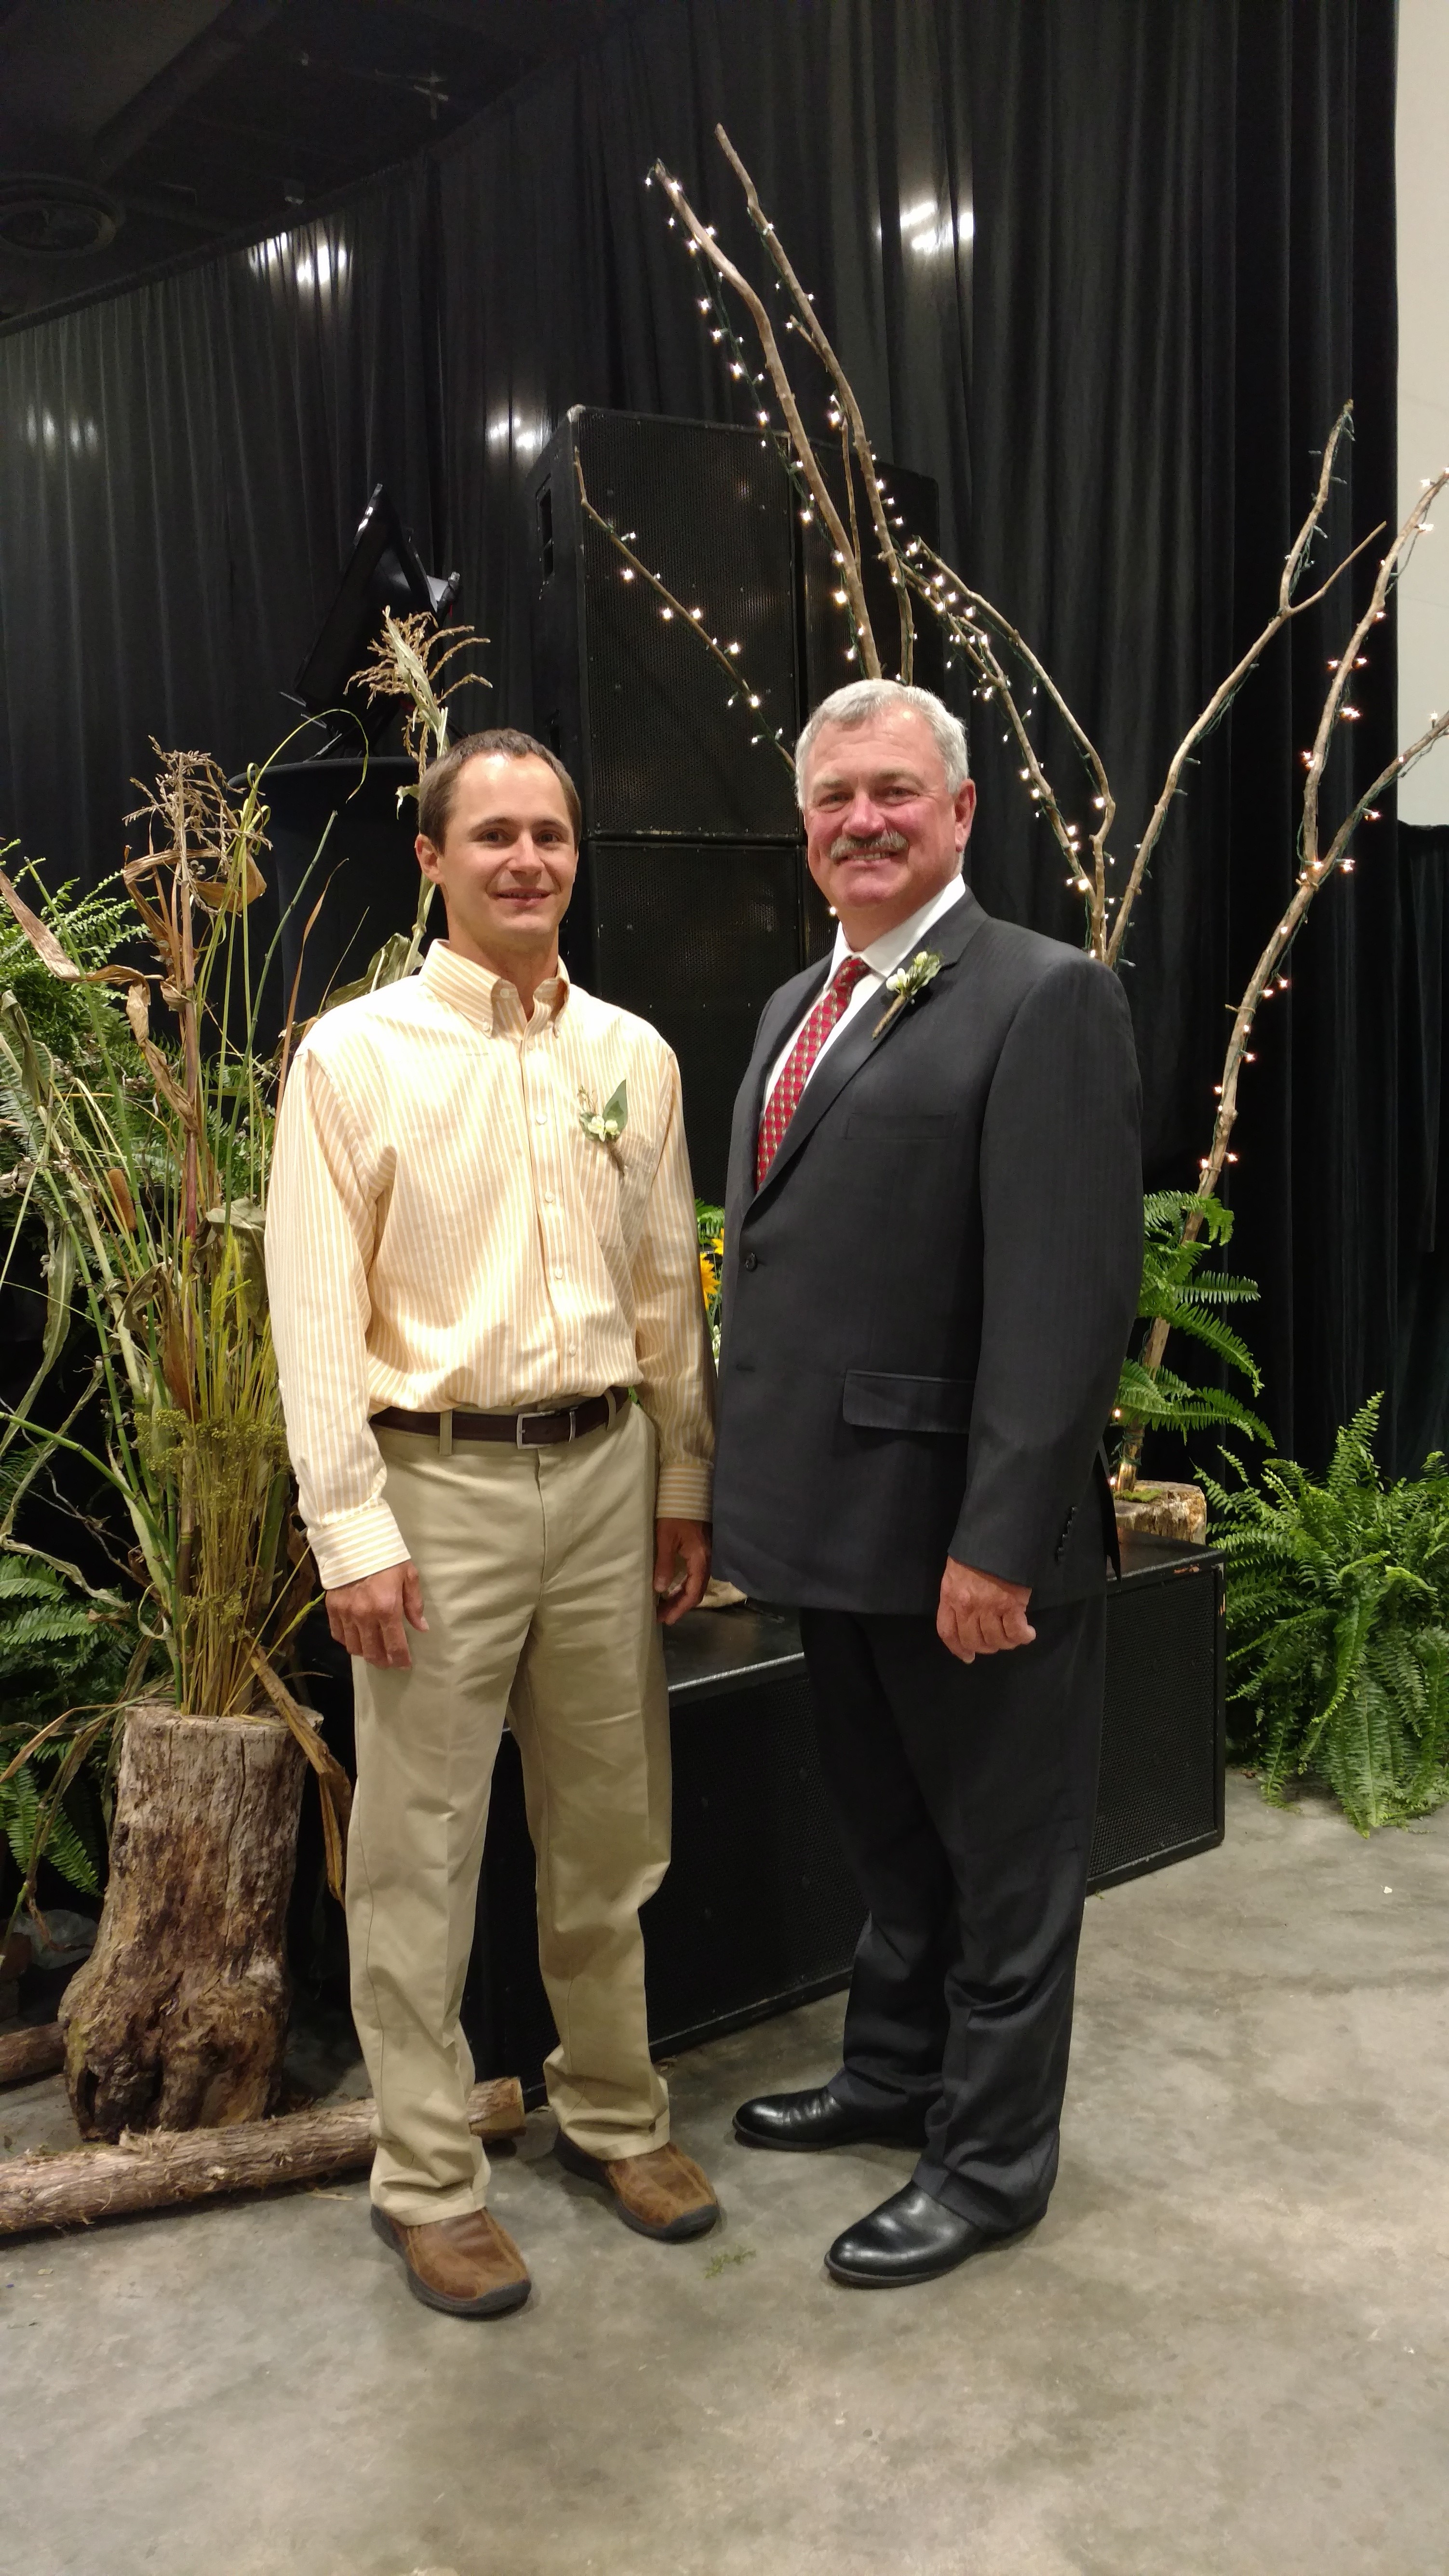 Sheldon Gerhardt (left), an Extension agent in Logan County, and Karl Hoppe, an area Extension specialist at the Carrington Research Extension Center, are honored for their work at the National Association of County Agricultural Agents' convention in Little Rock, Ark. (NDSU photo)